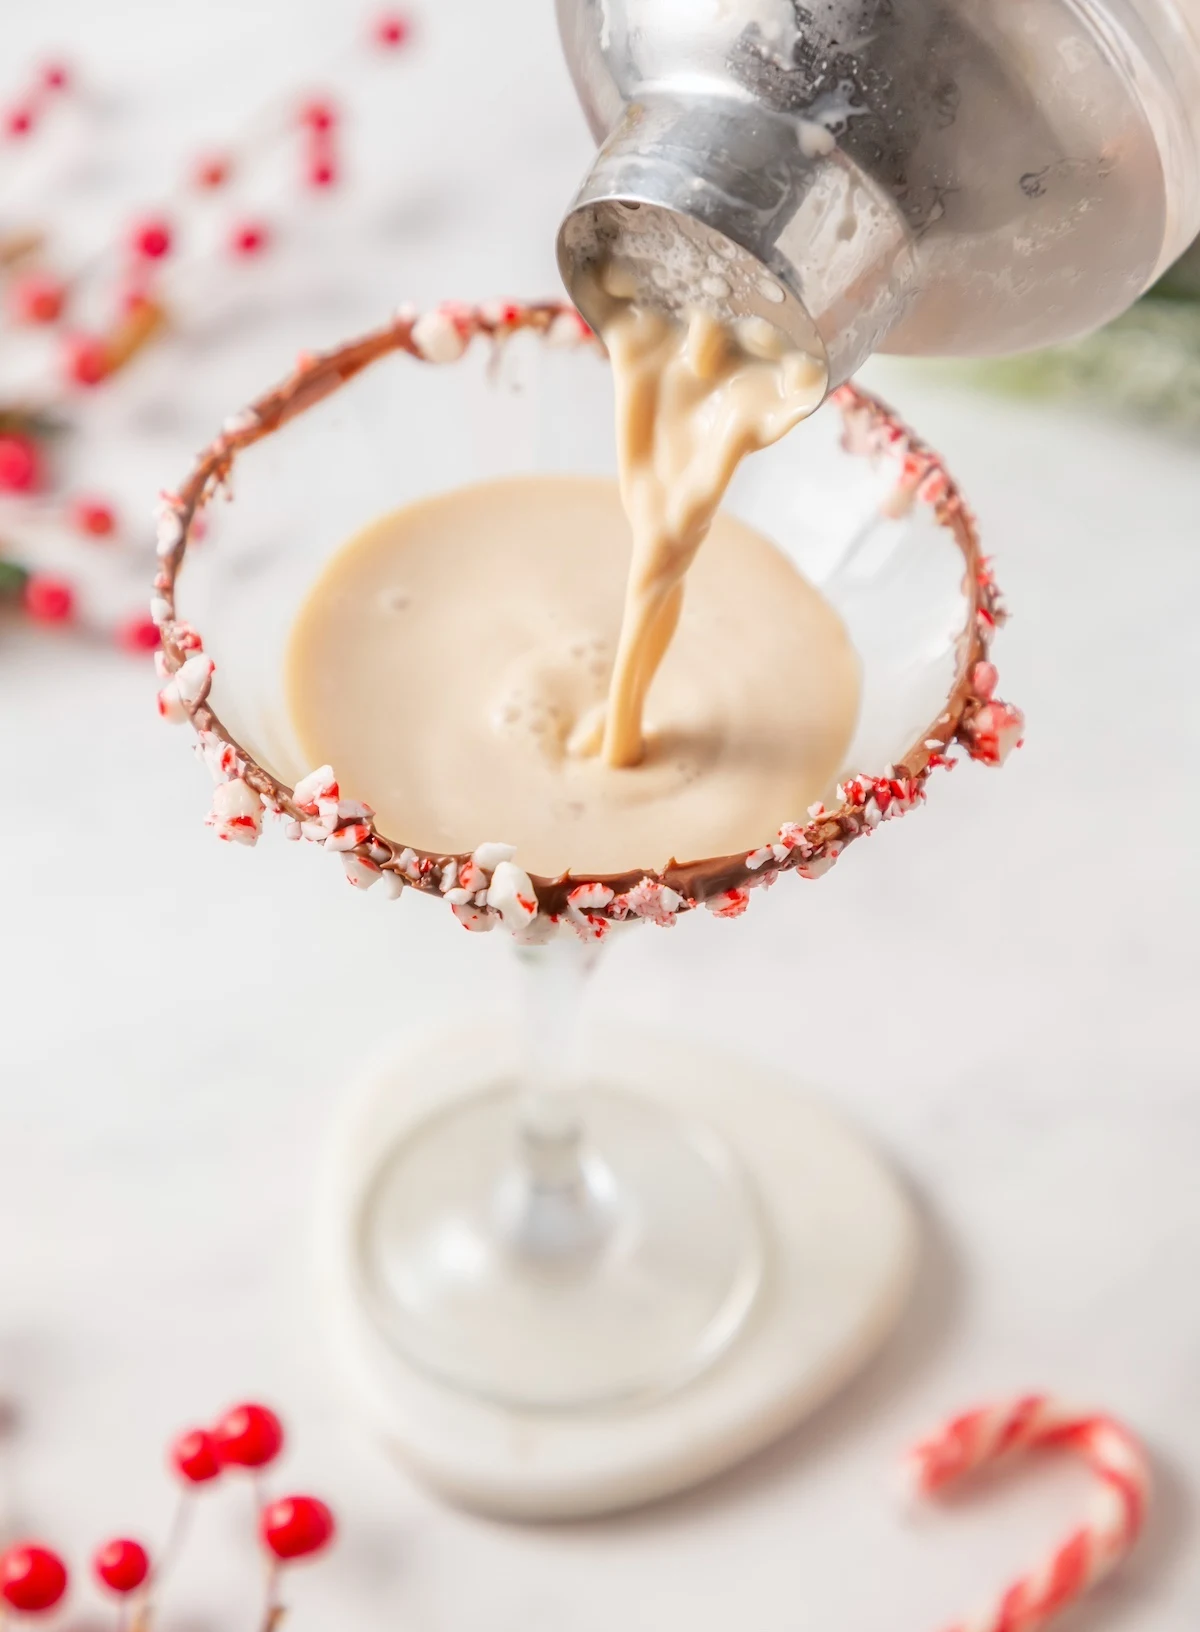 Pouring the candy cane martini into the prepared glass